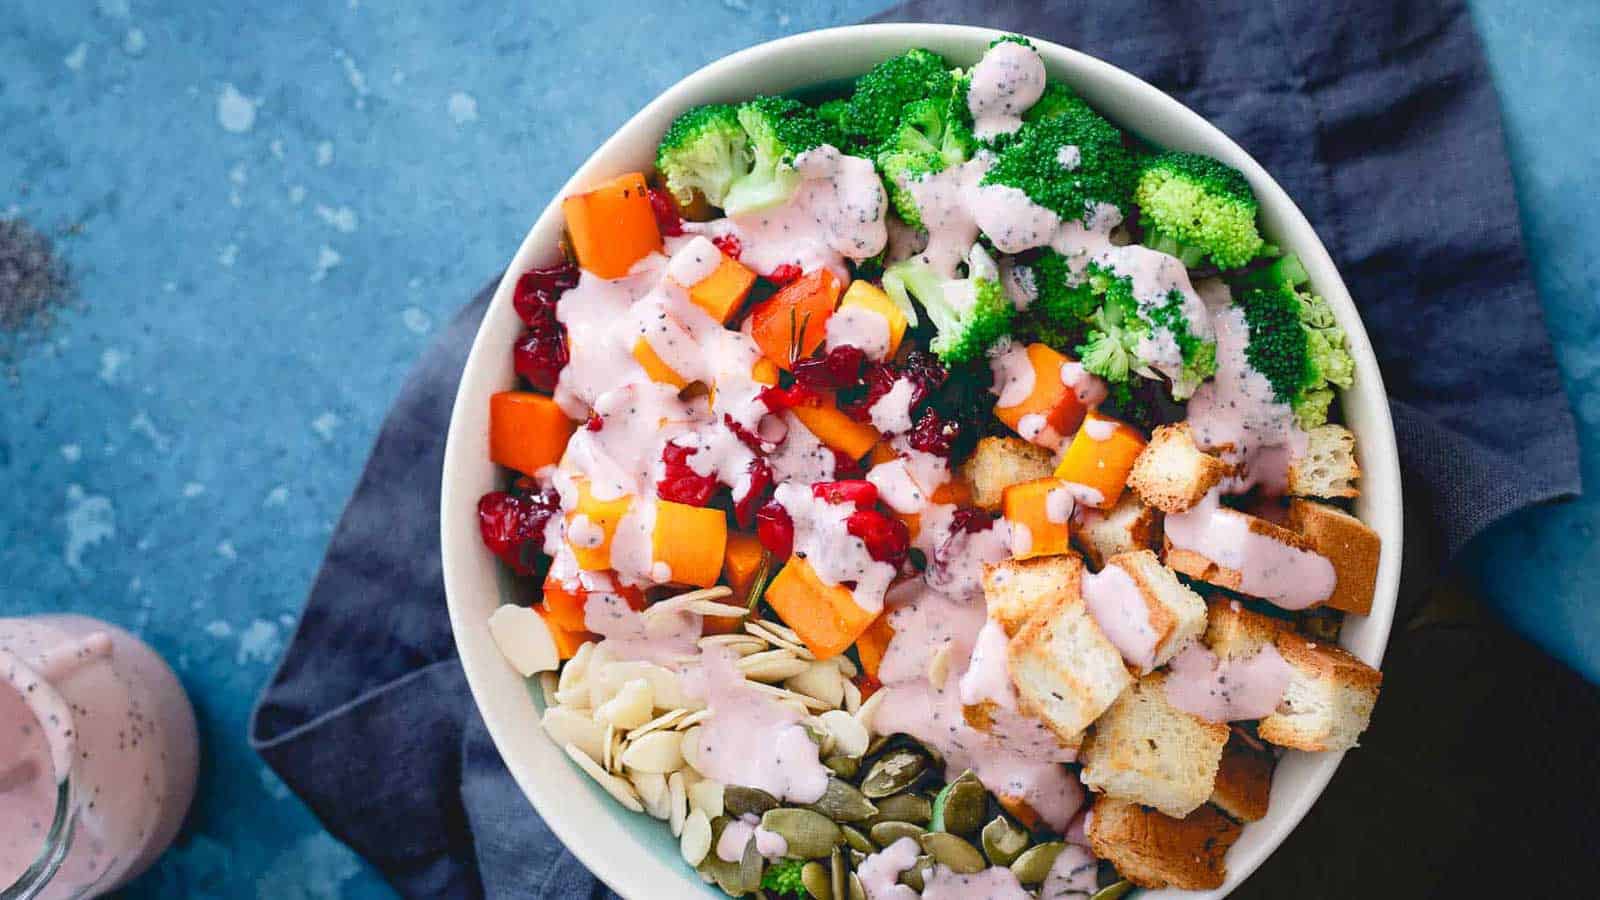 A bowl filled with broccoli, carrots and cranberries.